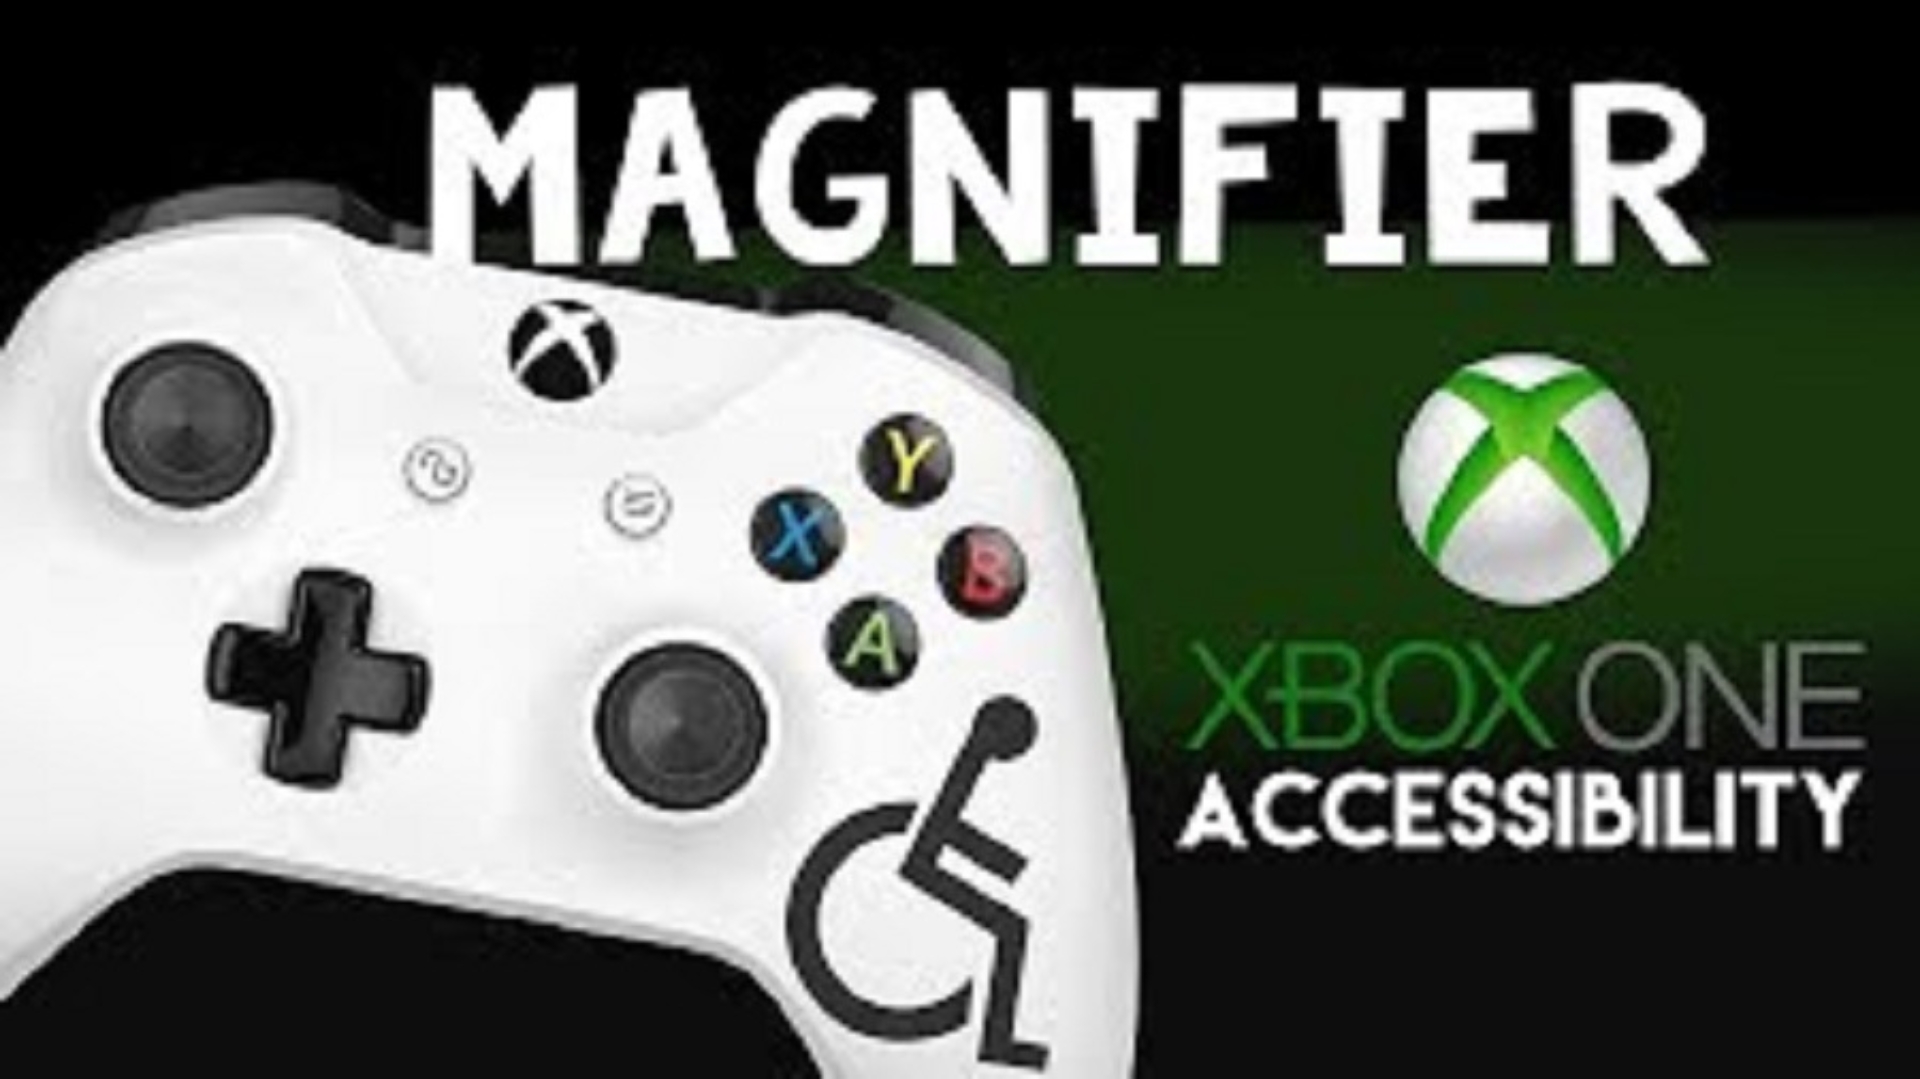 Magnifier XBox ONE Accessibility